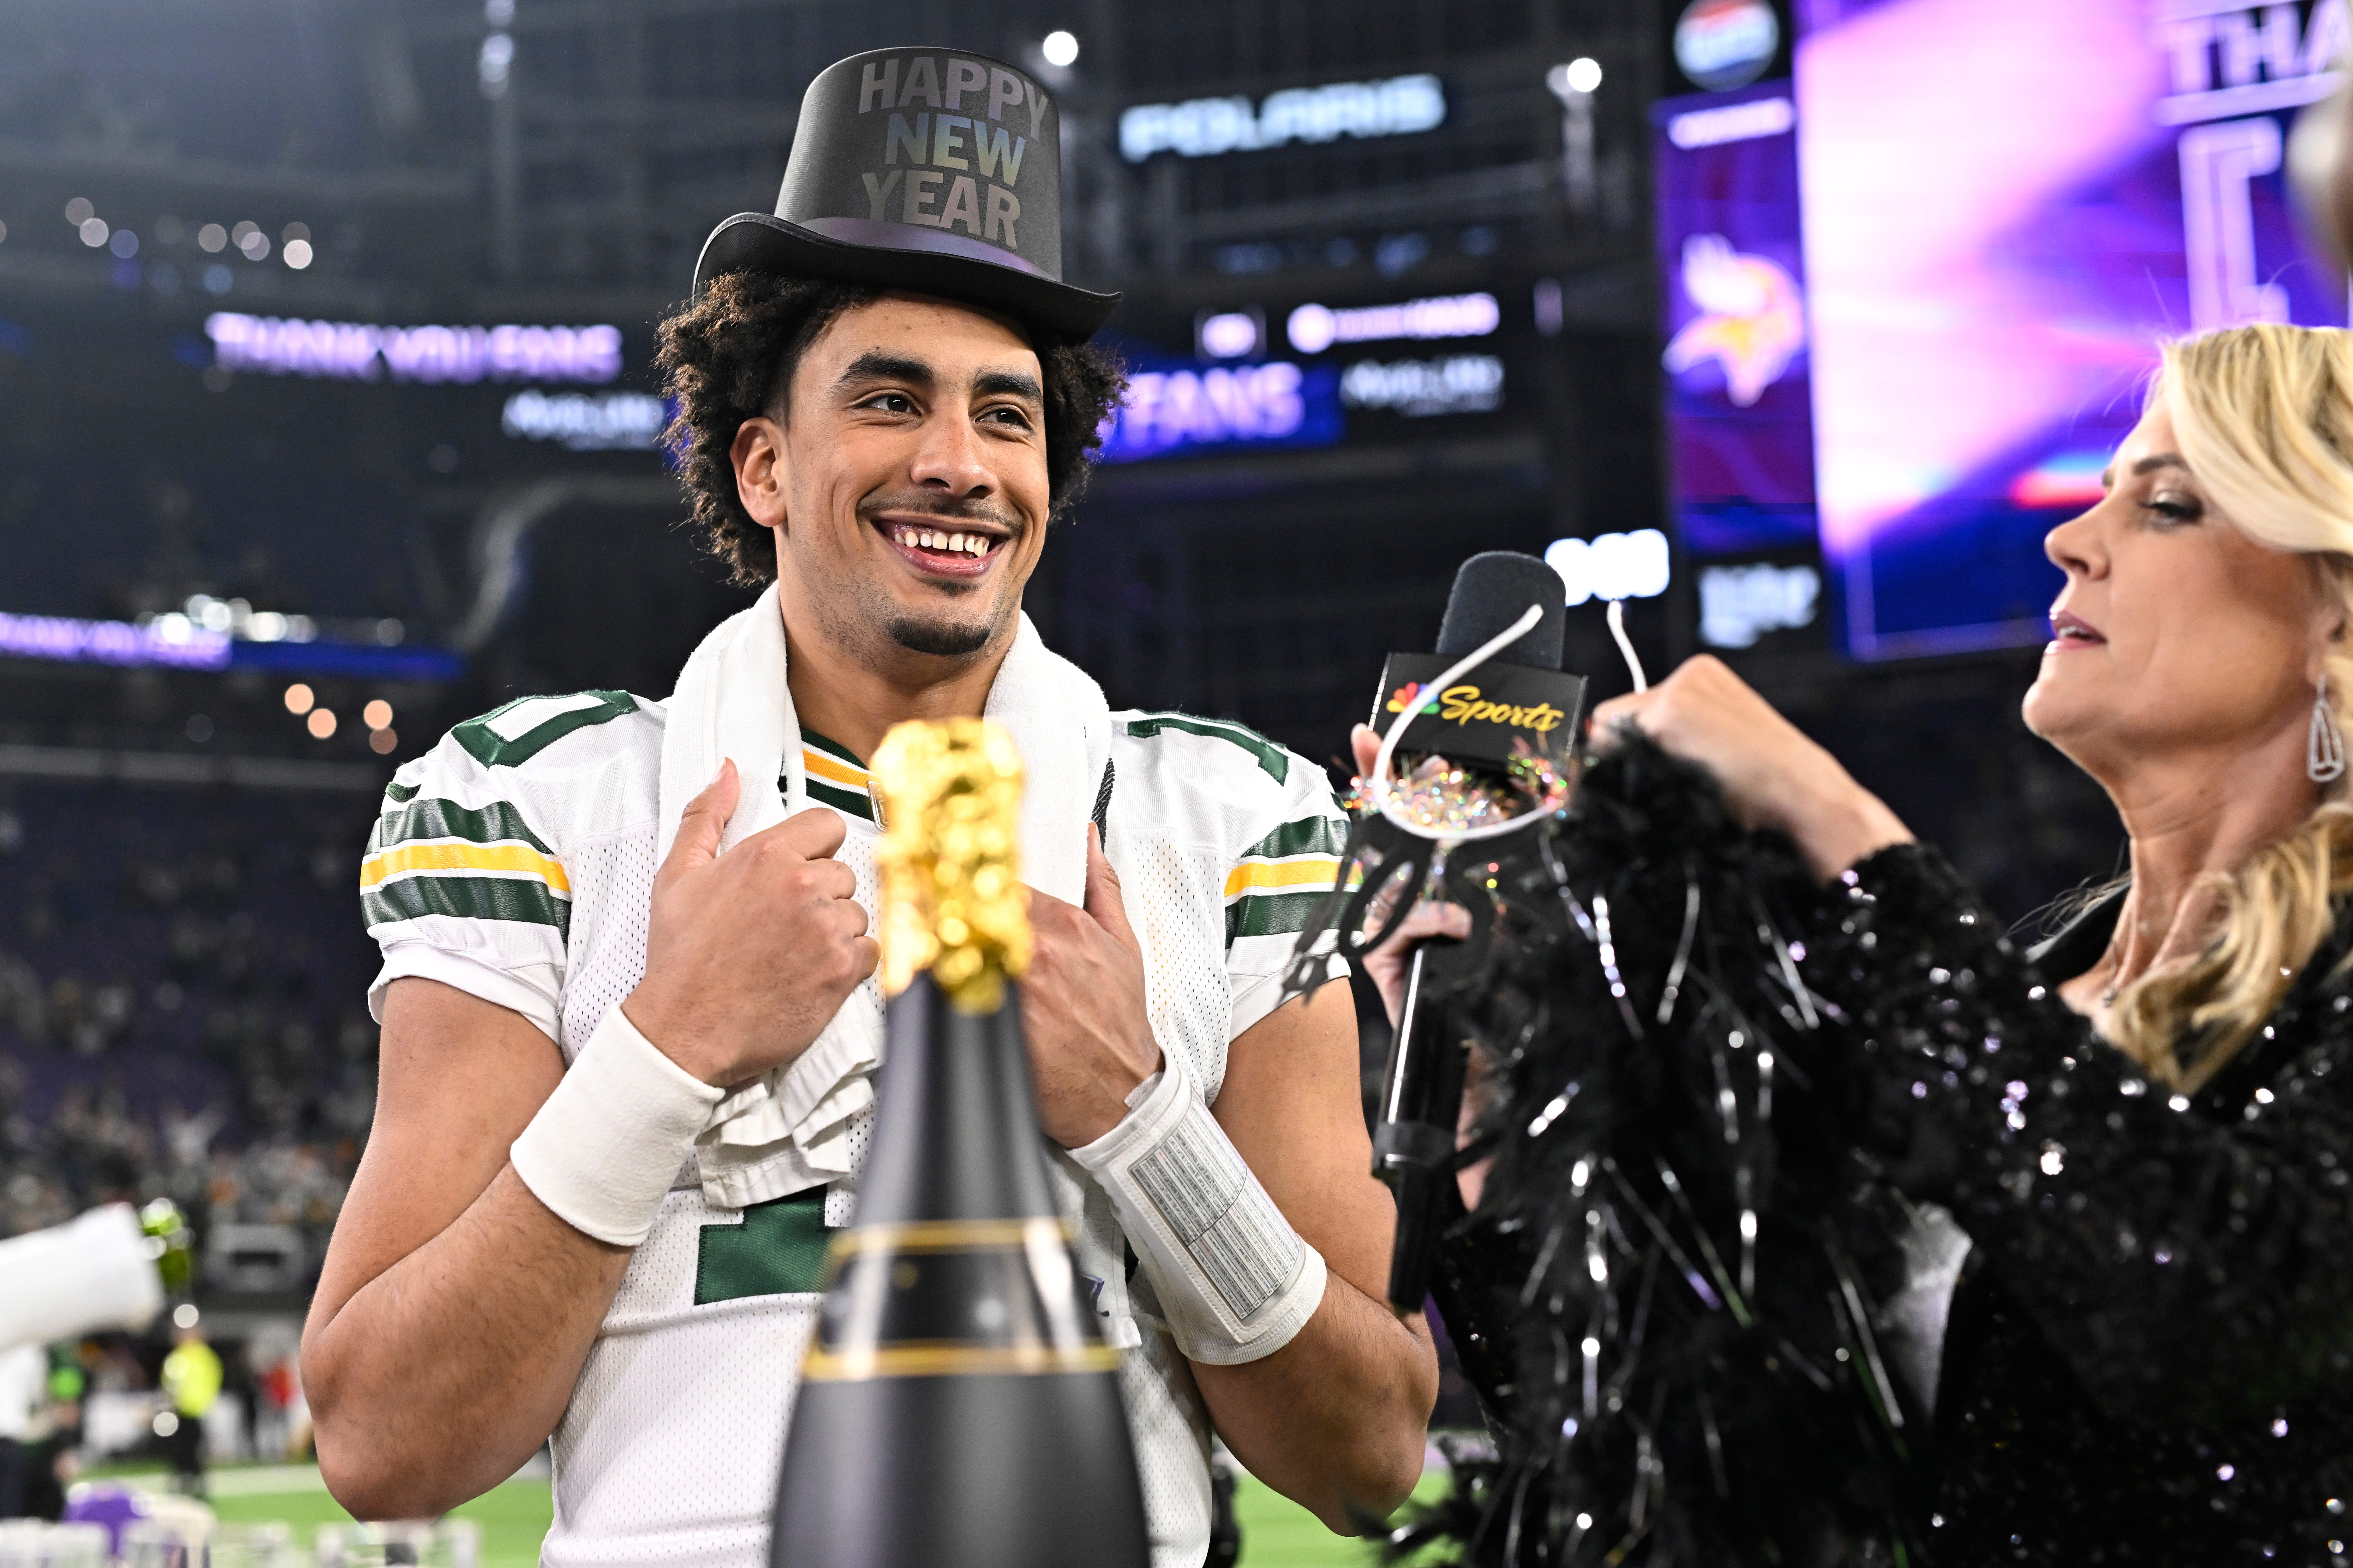 Jordan Love #10 of the Green Bay Packers celebrates on New Year's Eve during his post-game interview after a 33-10 victory against the Minnesota Vikings at U.S. Bank Stadium on December 31, 2023 in Minneapolis, Minnesota.